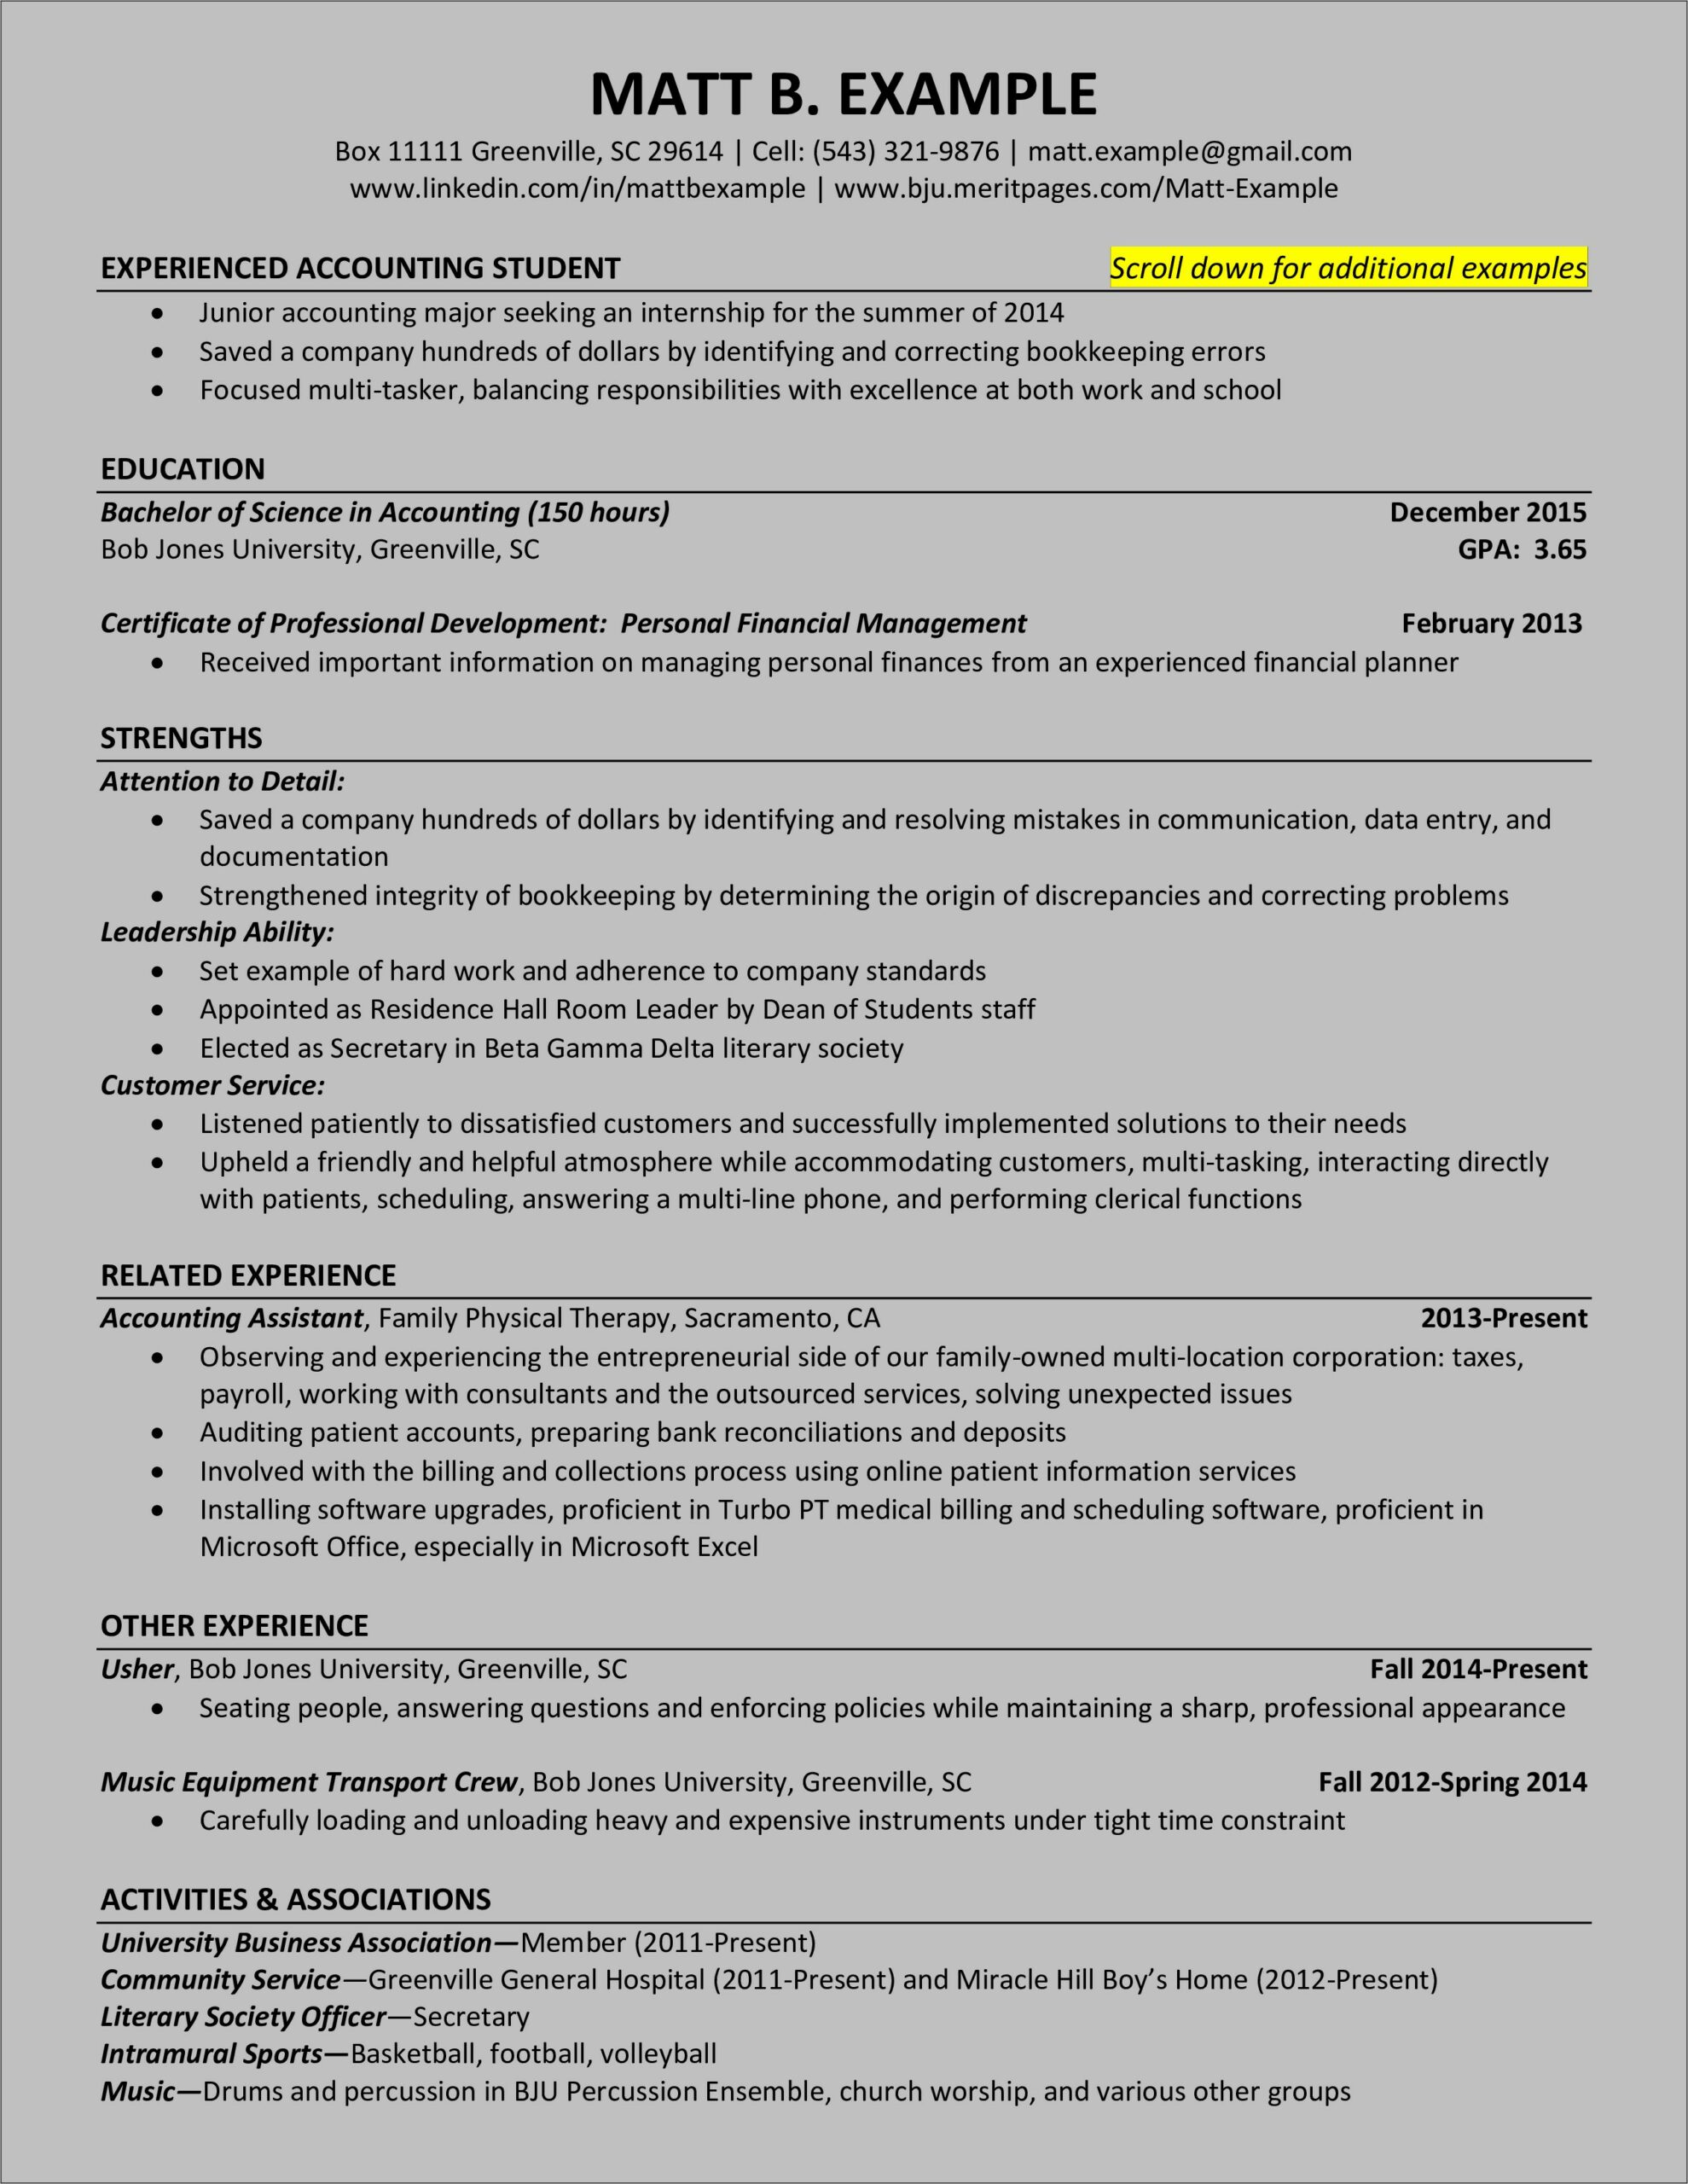 Best Font For Accounting Resume